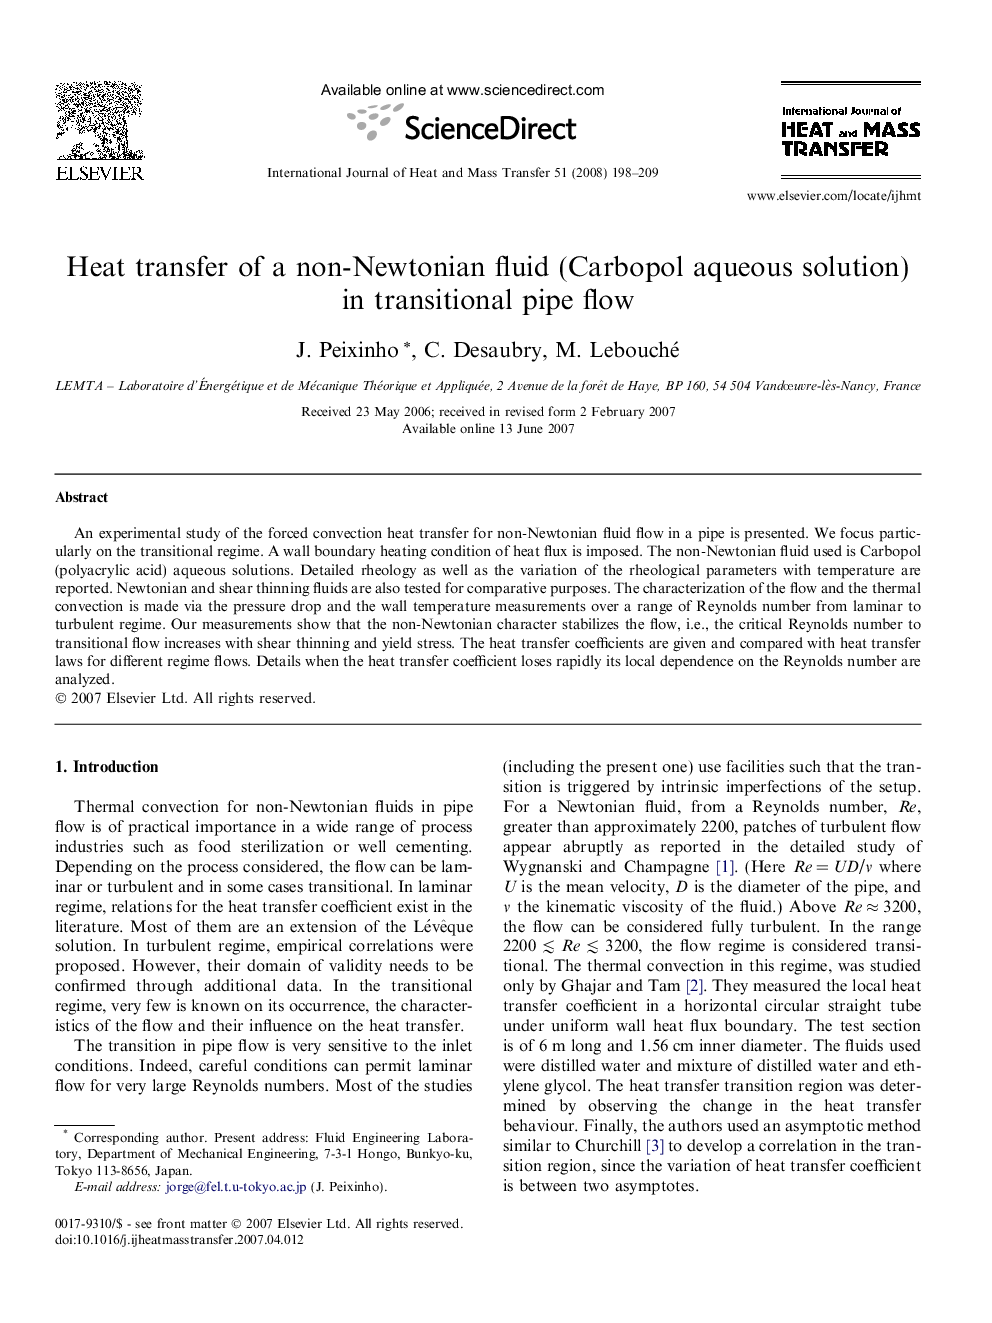 Heat transfer of a non-Newtonian fluid (Carbopol aqueous solution) in transitional pipe flow